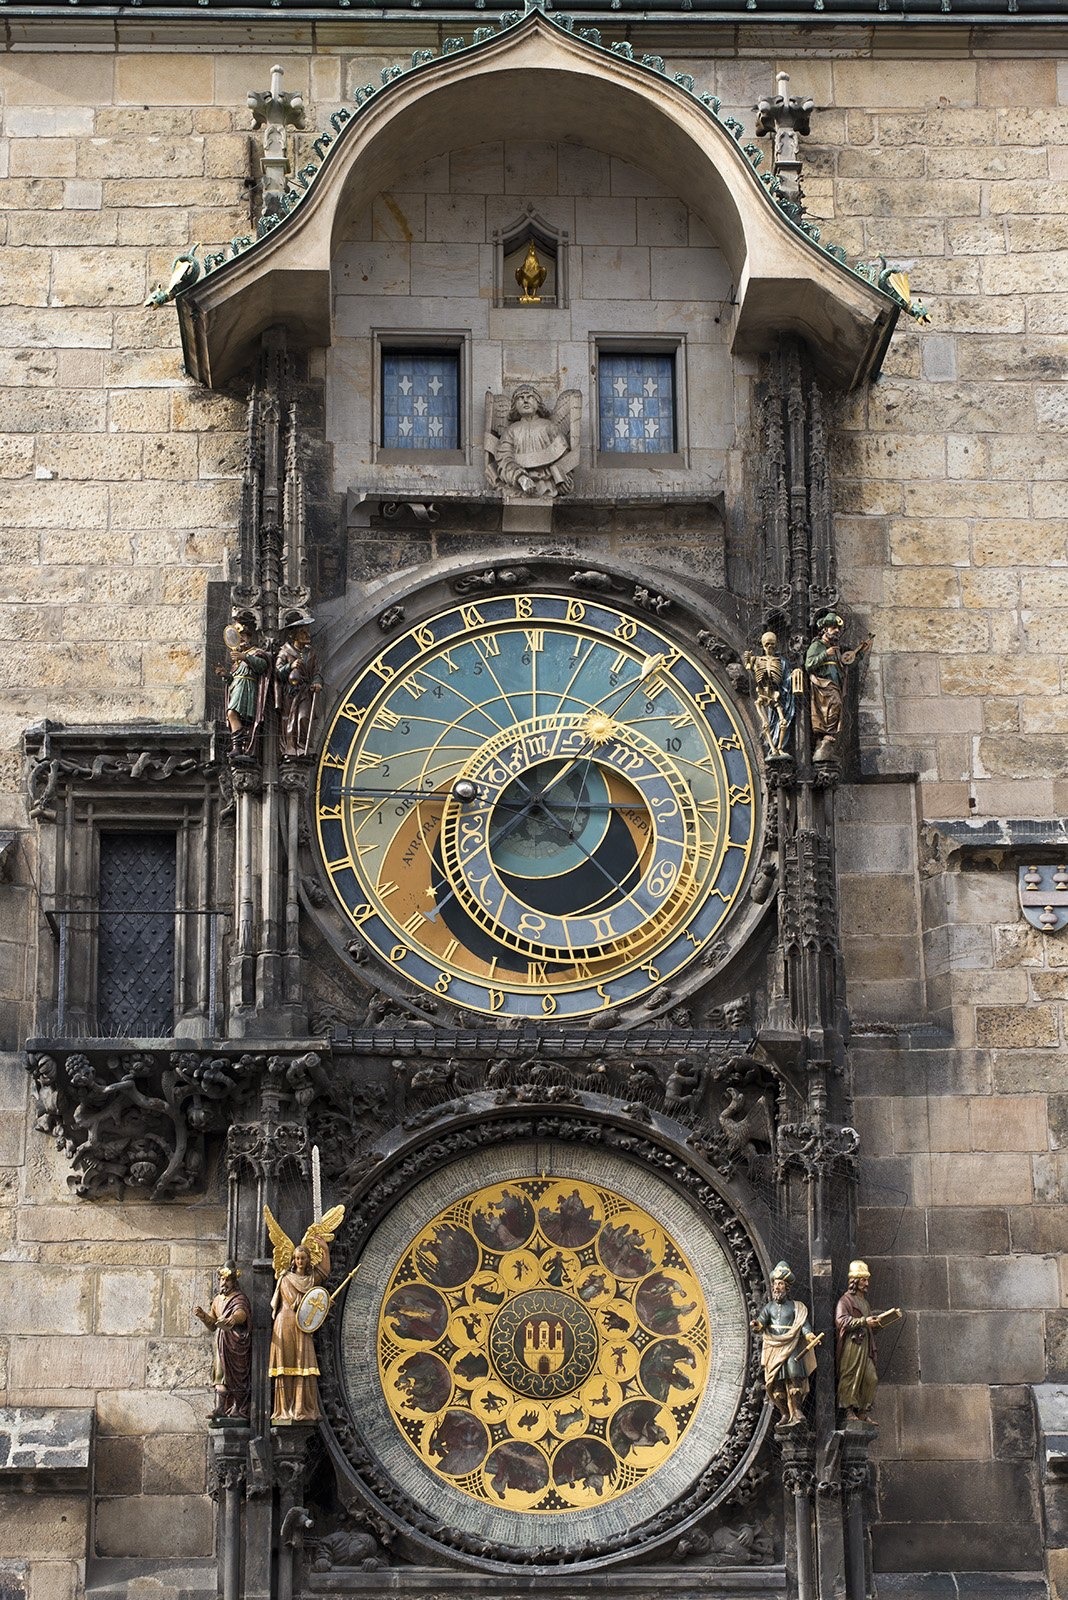 The Prague Astronomical Clock, The Medieval Clock, Was Installed In 1410 And Is Considered To Be The Oldest Operating Astronomical Clock In The World